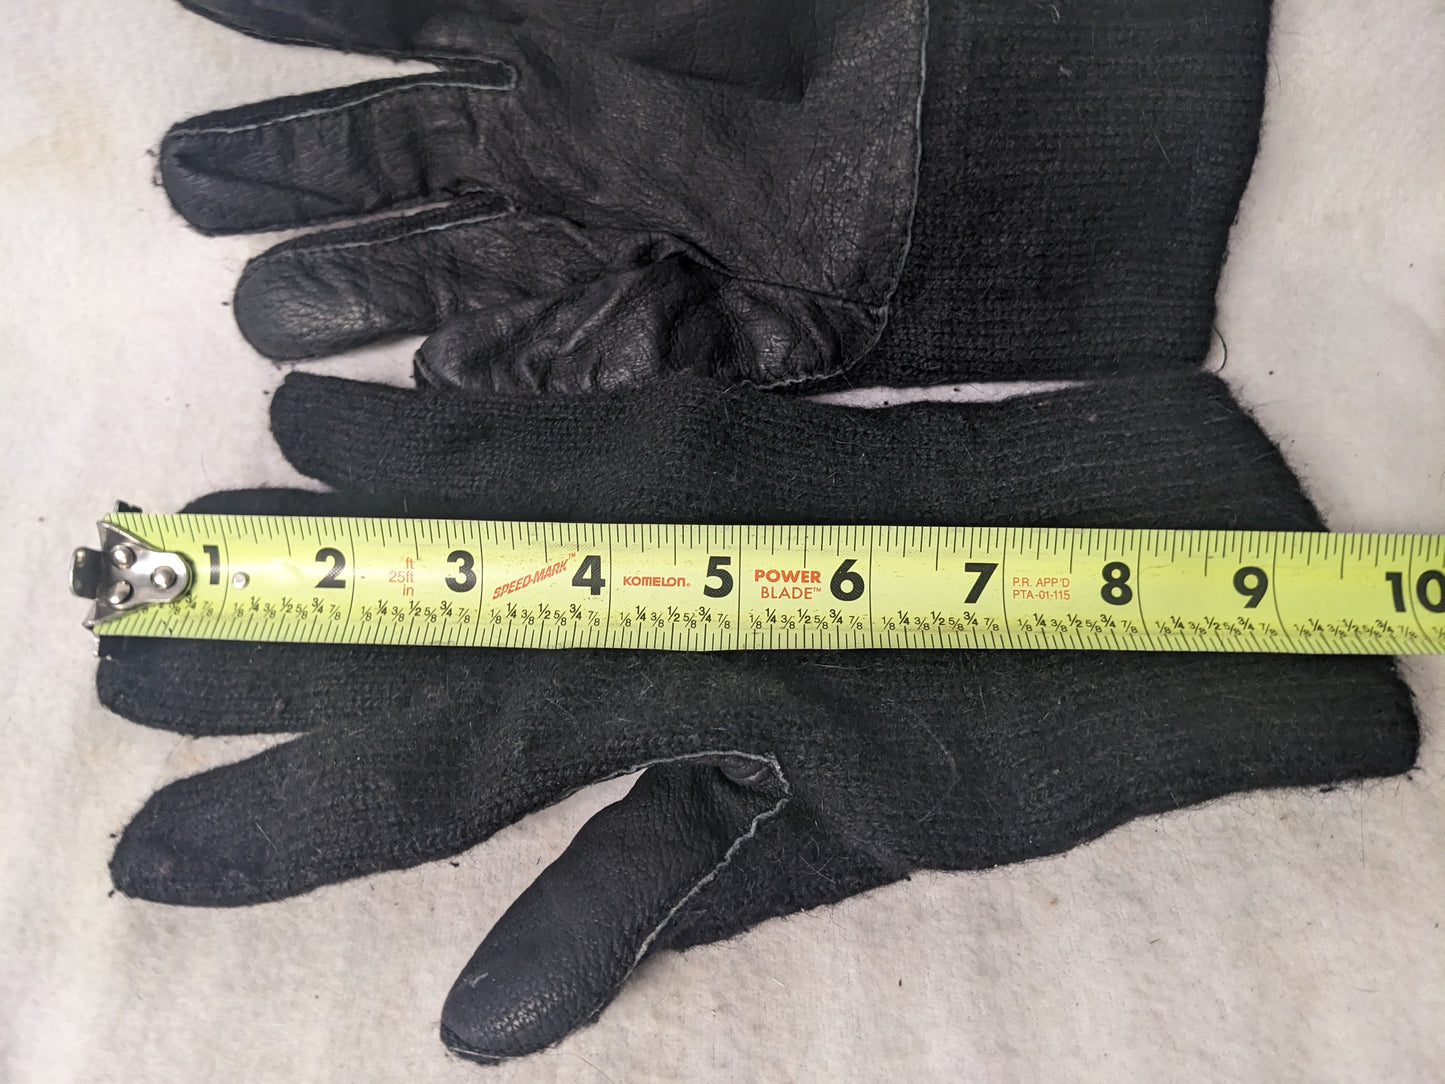 Knit Winter Gloves Gloves Size 10 In Color Black Condition Used